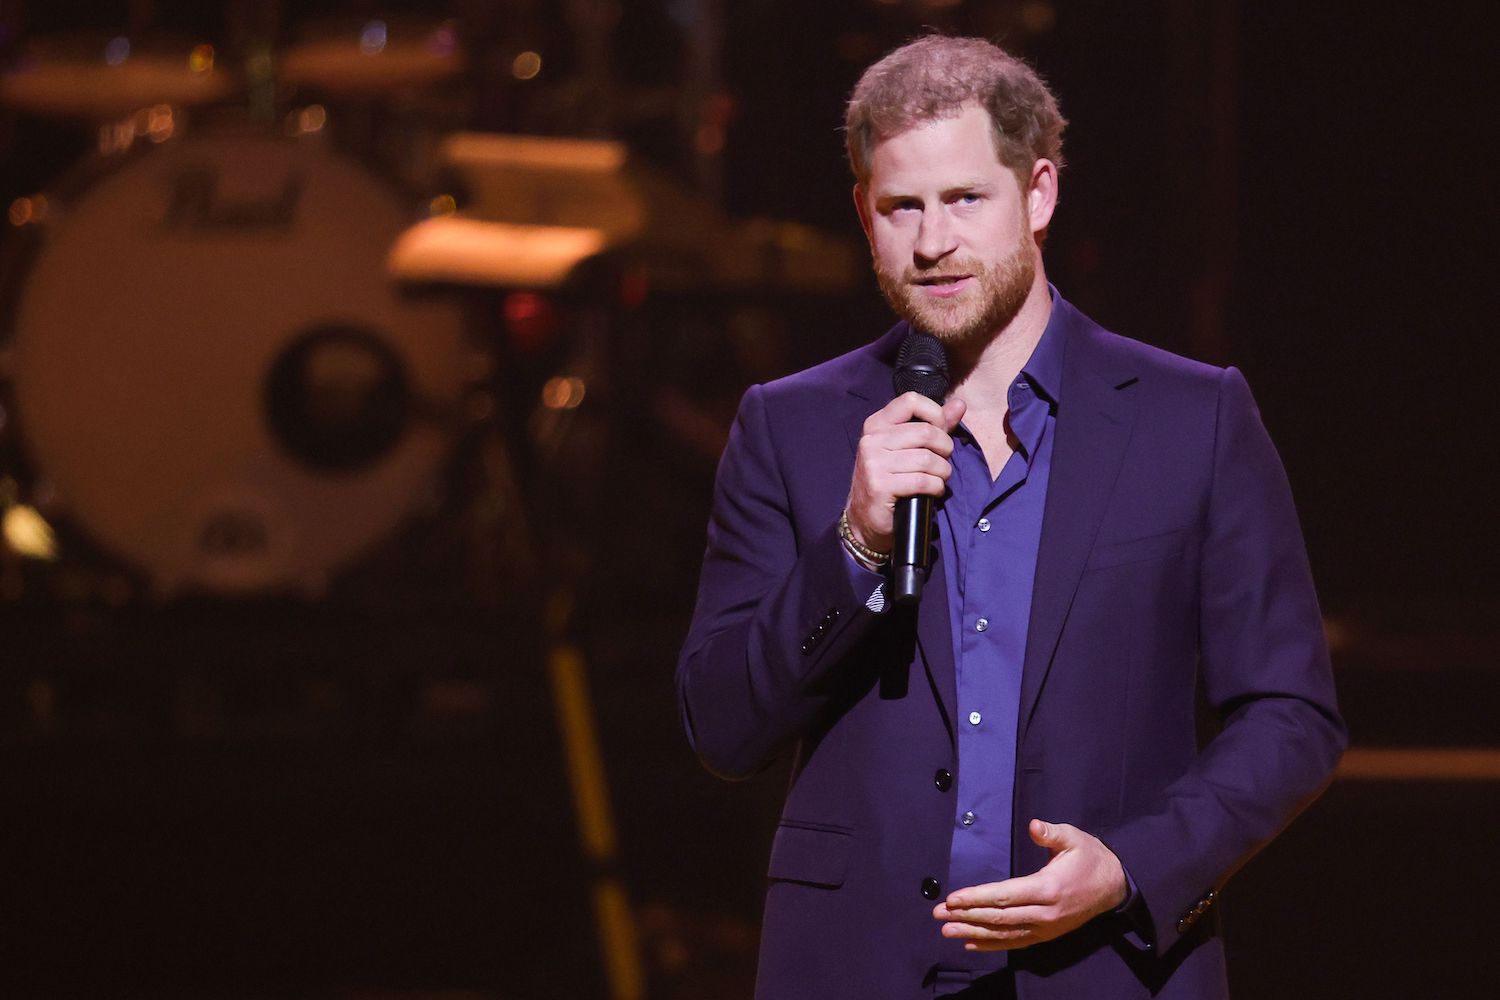 Prince Harry body language shows hand gesture while he speaks into a microphone during Invictus Games